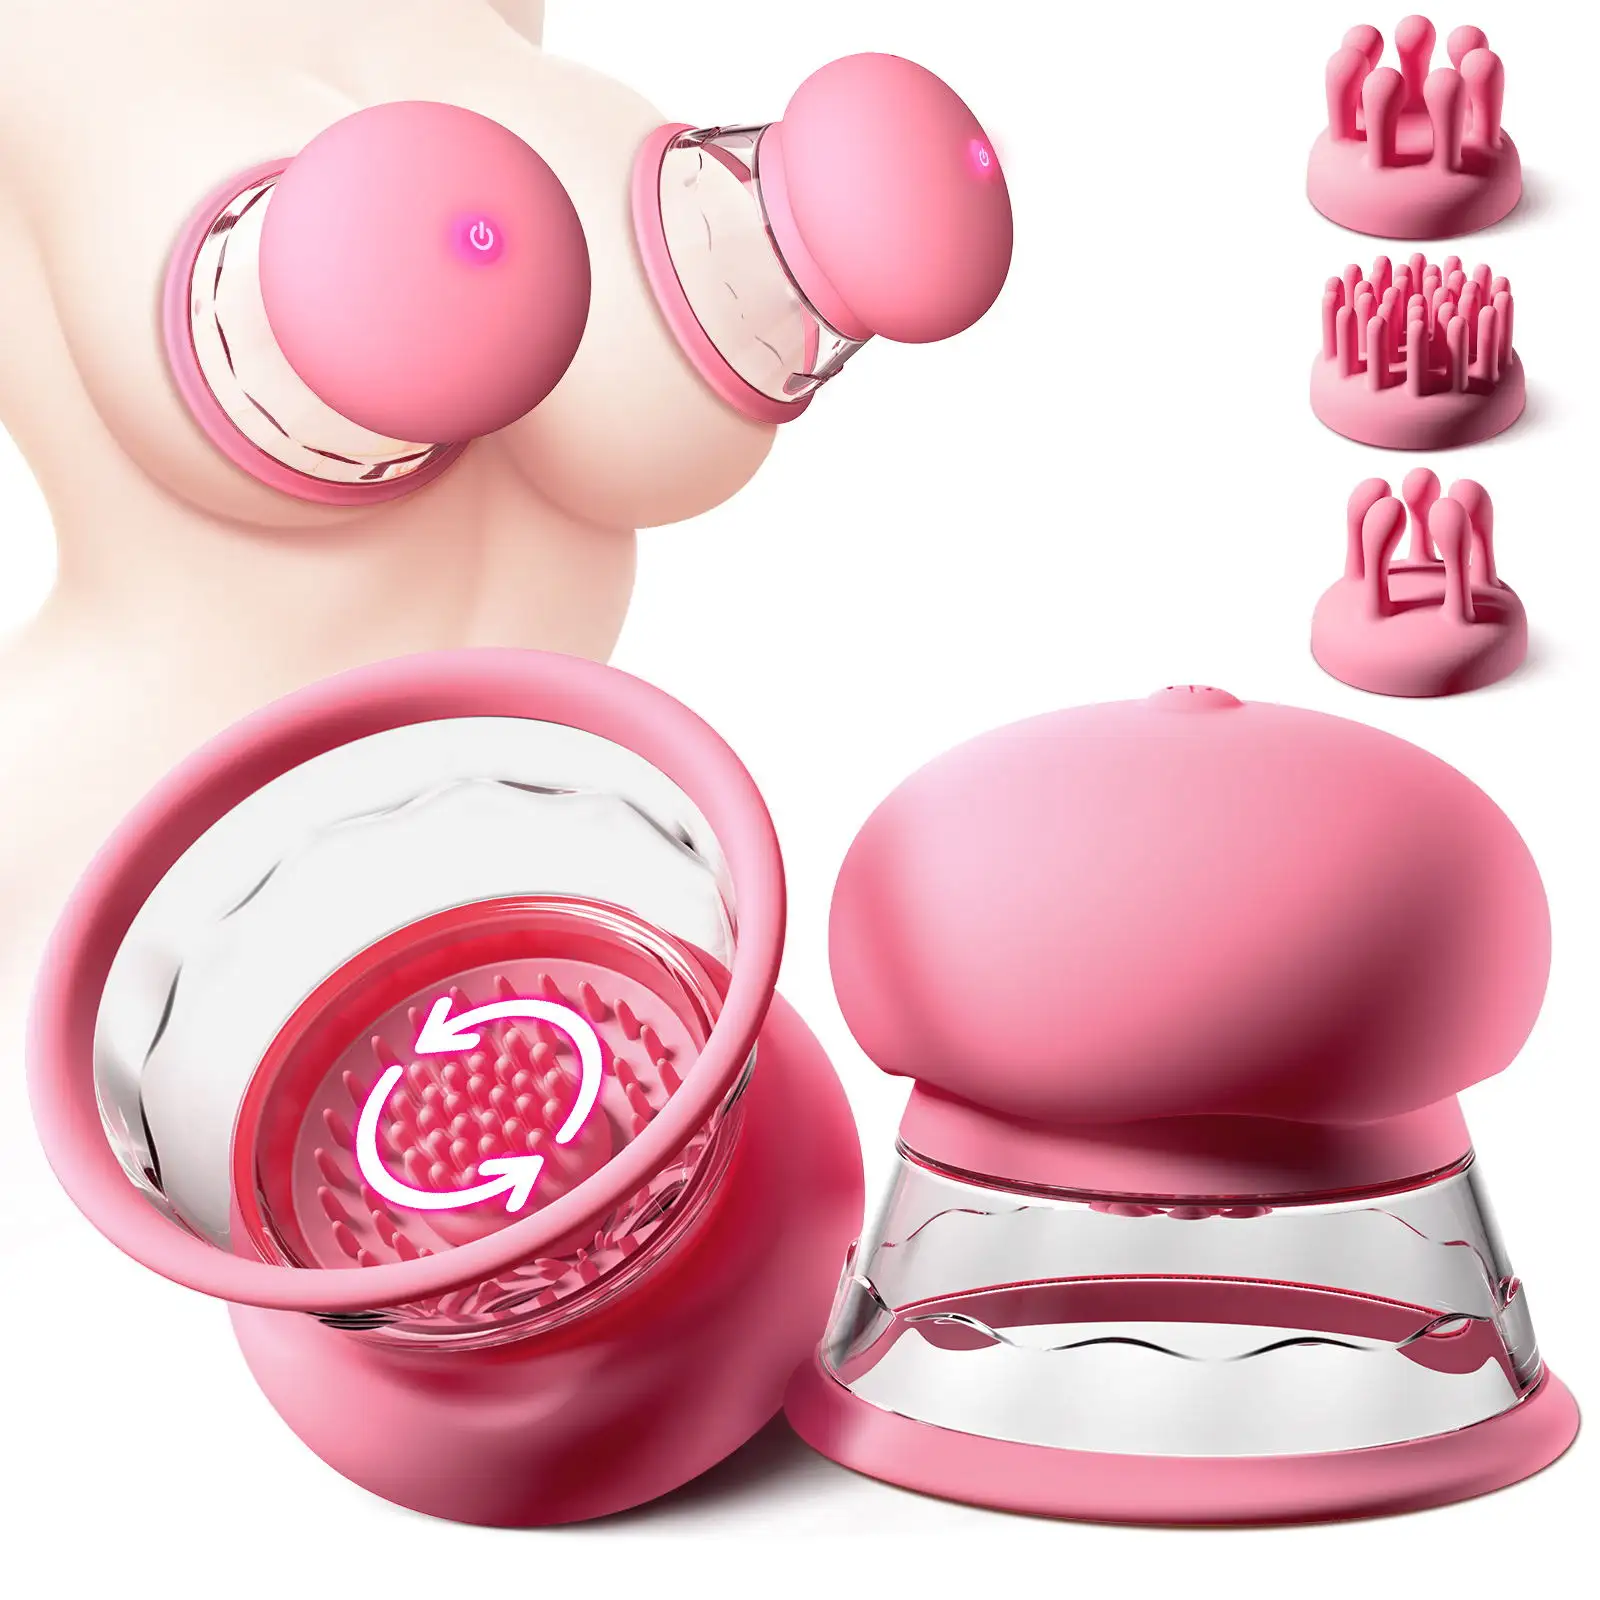 AAV Manufacture couple breast massager clitoral g spot tongue female rose adult vibrator sex toys for woman